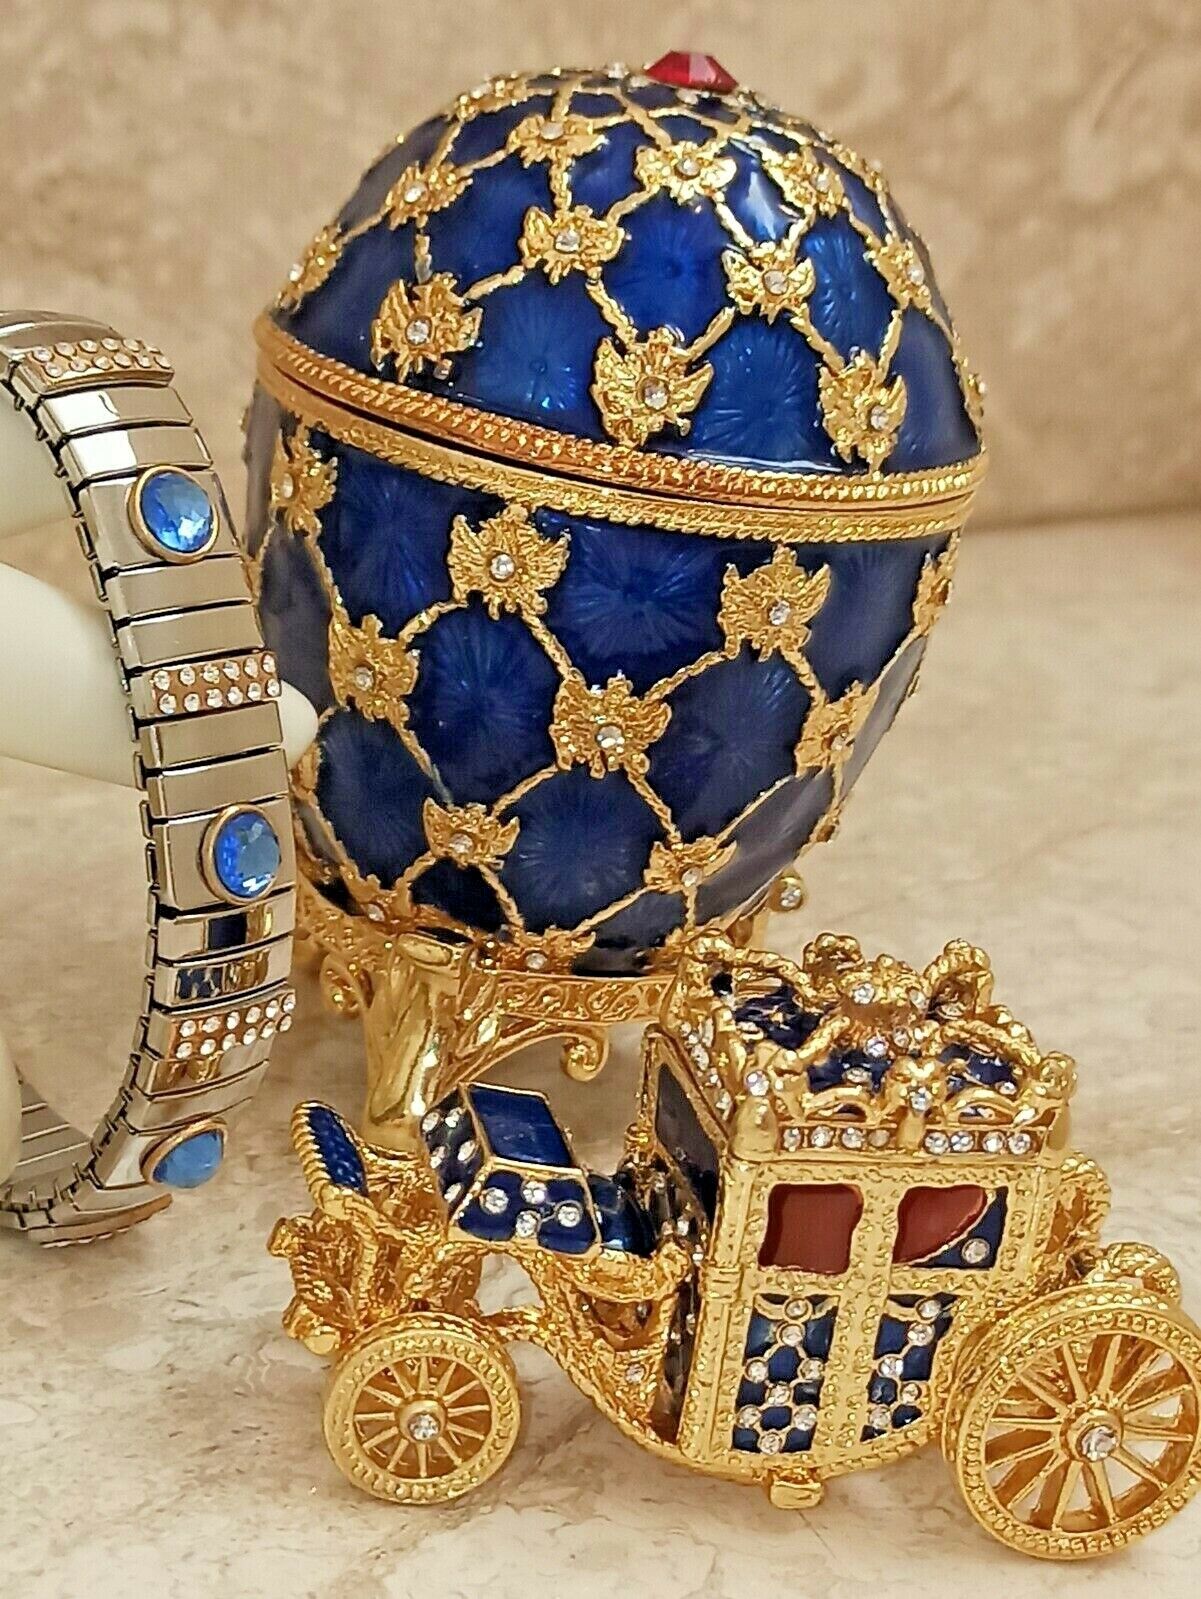 HIs and Her Couples gift Faberge Egg Jewelry box set HANDMADE 24k GOLD 10ct Diam